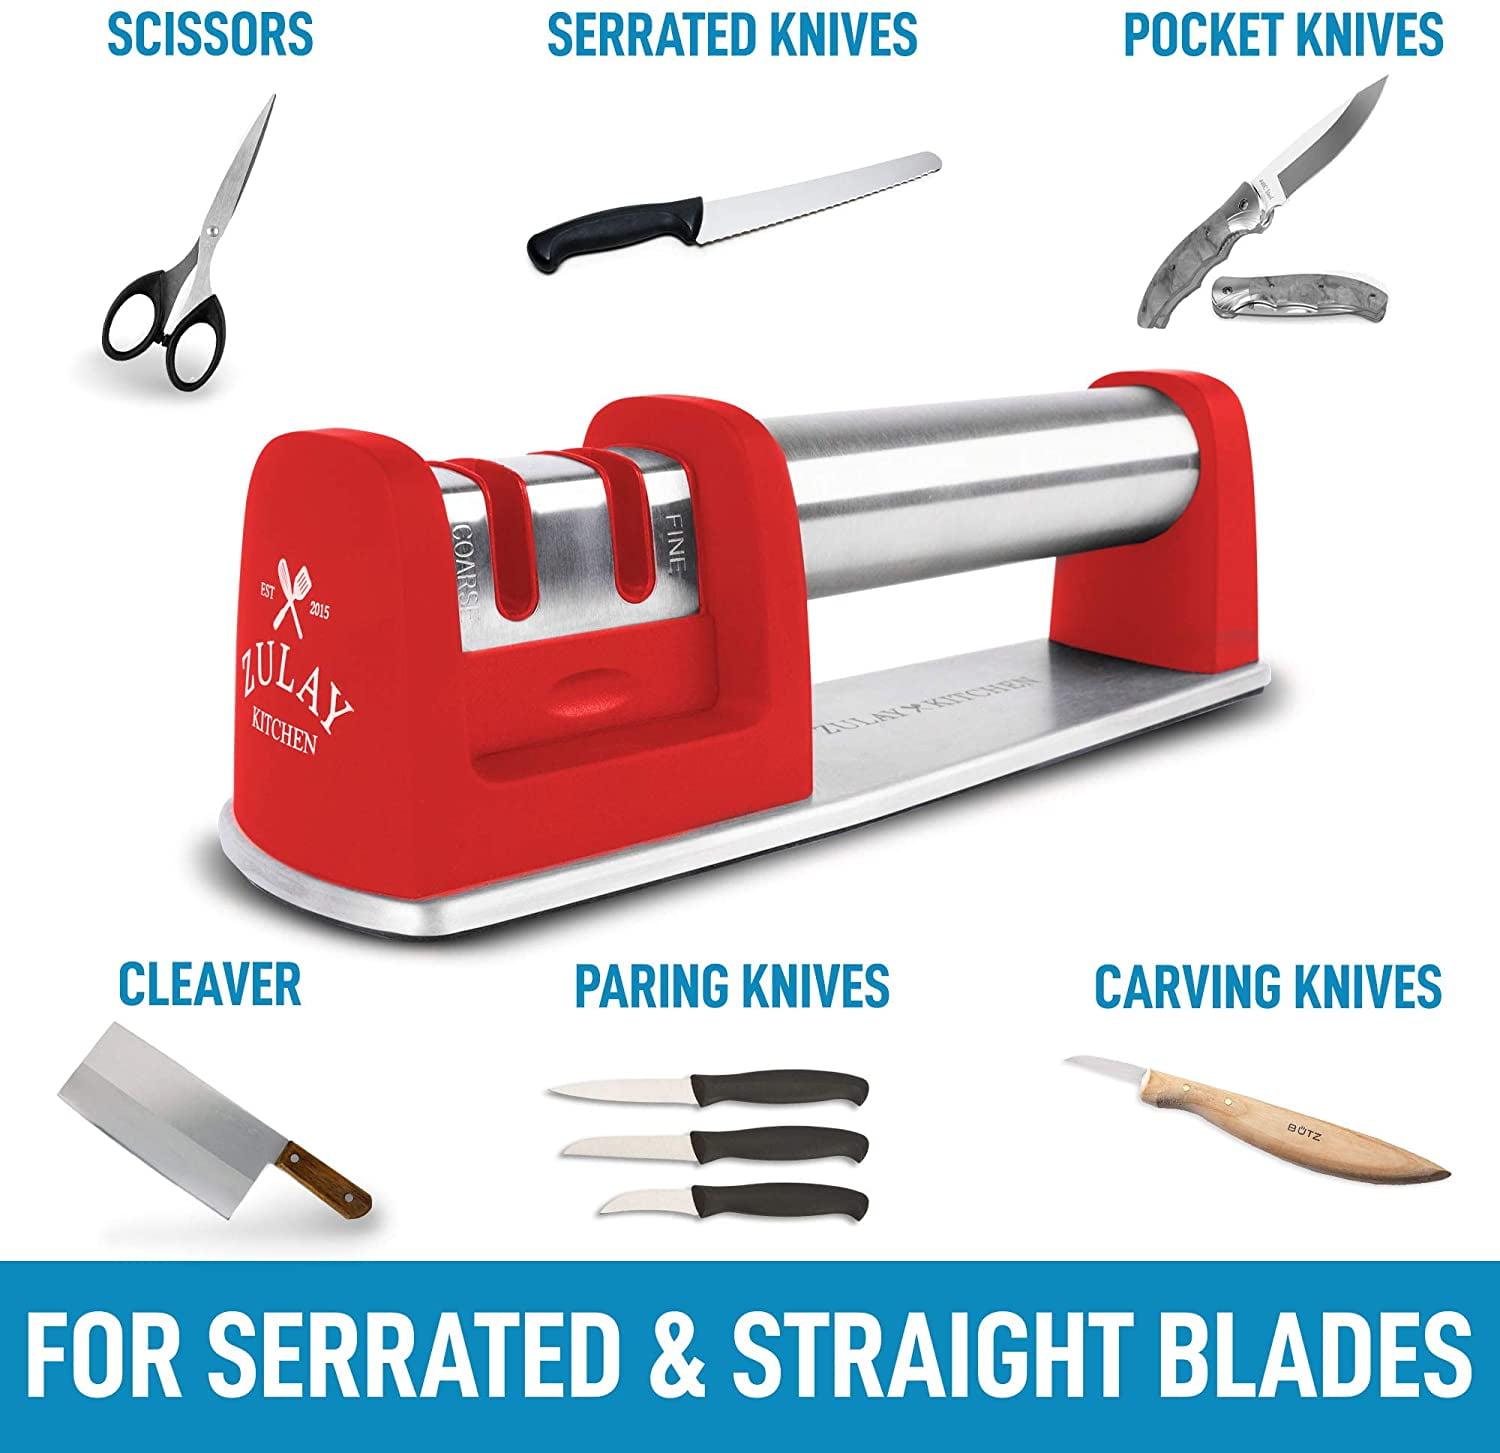 Sharpening Instructions, Knives need sharpening? You can sharpen your  straight-edge knives at home like a pro with Cutco's knife sharpener and  these step-by-step instructions. 🔪, By Cutco Cutlery